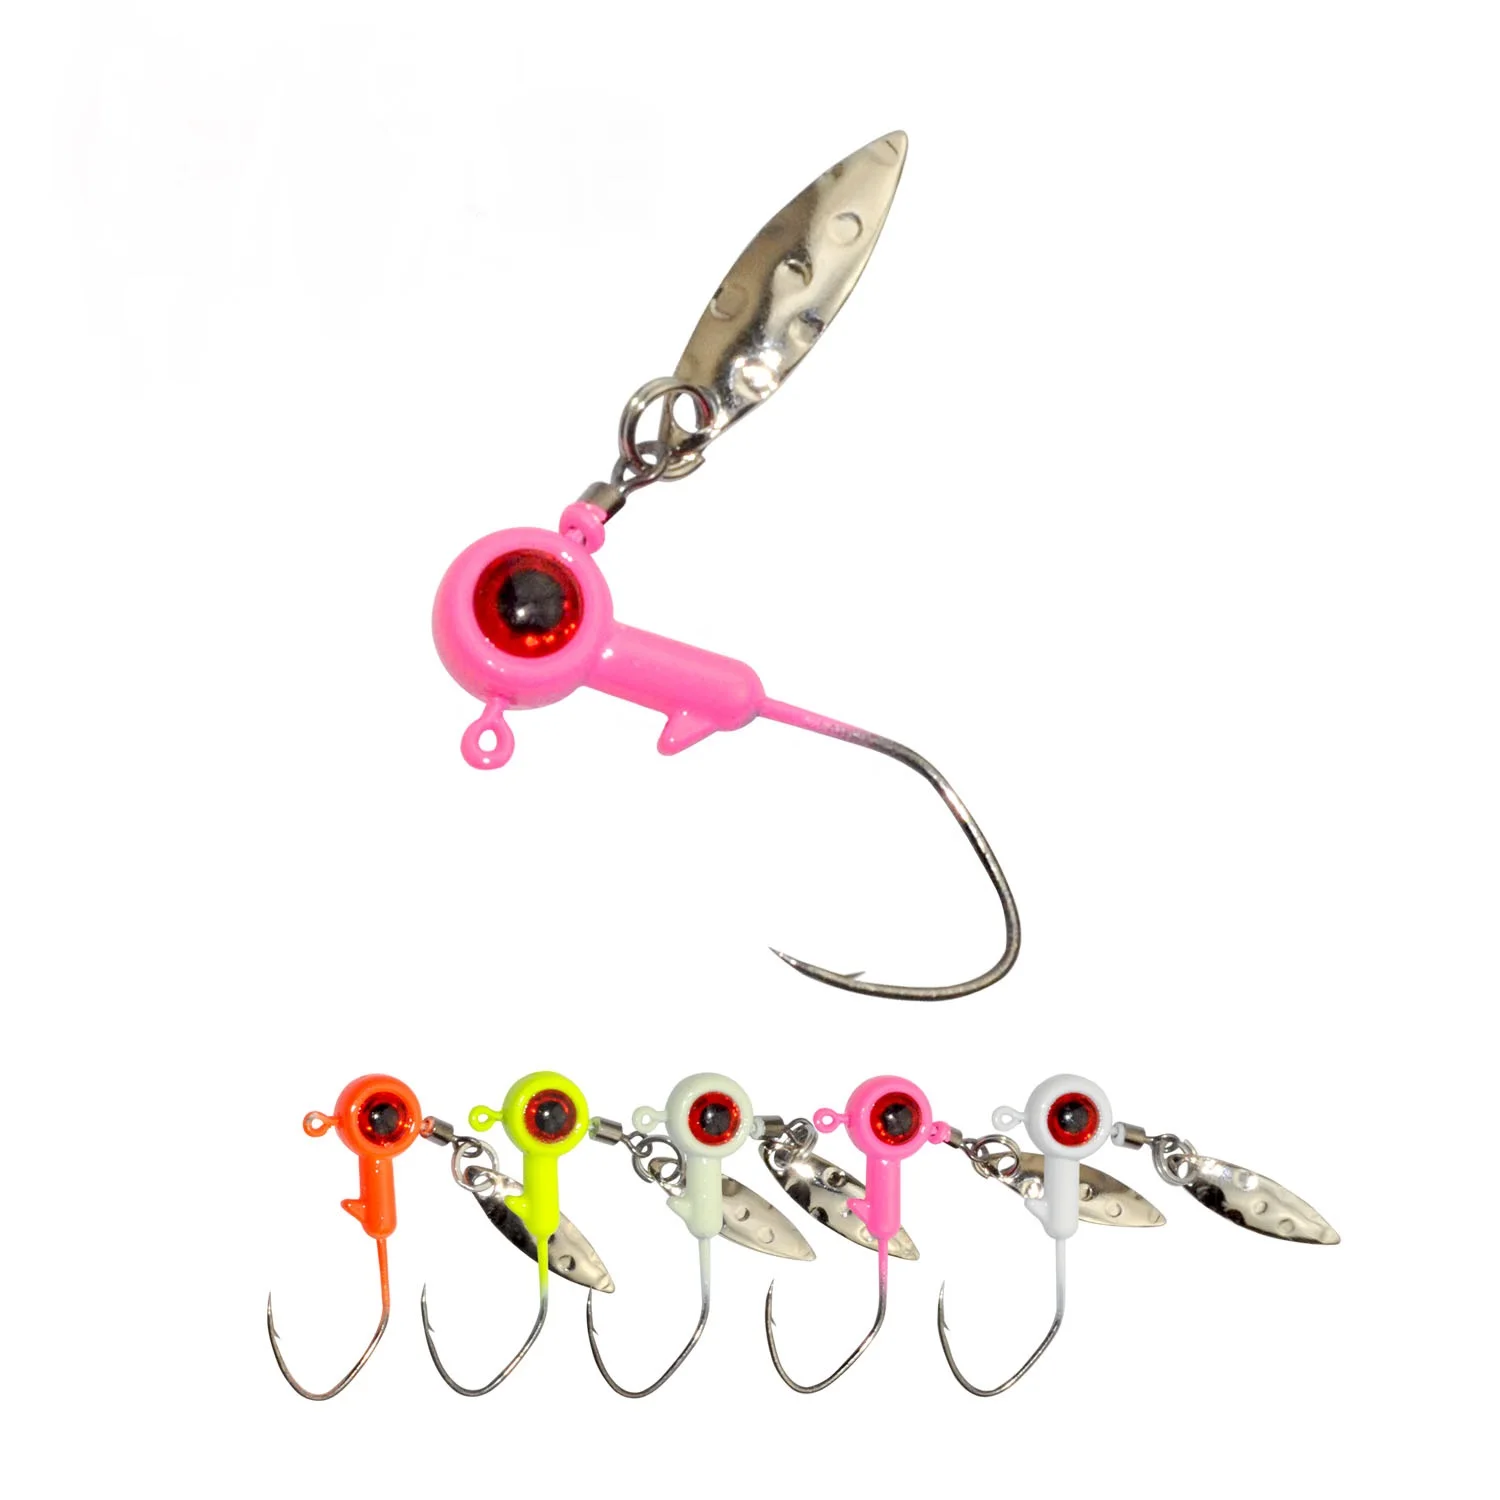 

Fishing lure lead jig head hook 1.75g 3.5g metal bait for fish with single hooks, Red,yellow,luminous,pink,white